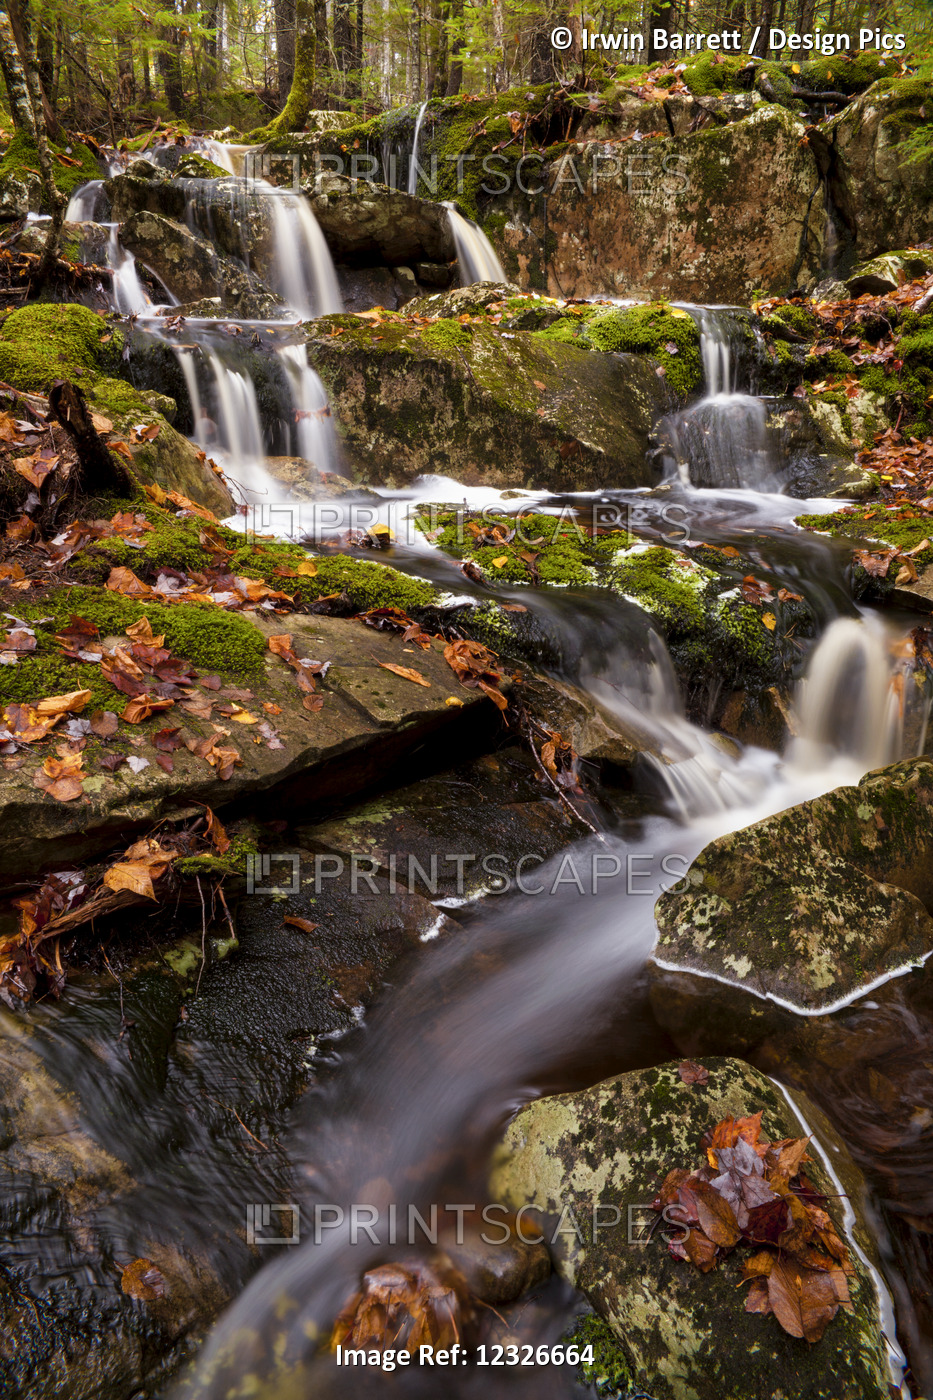 Waterfall And Brook In A Forest In Late Autumn; Bedford, Nova Scotia, Canada